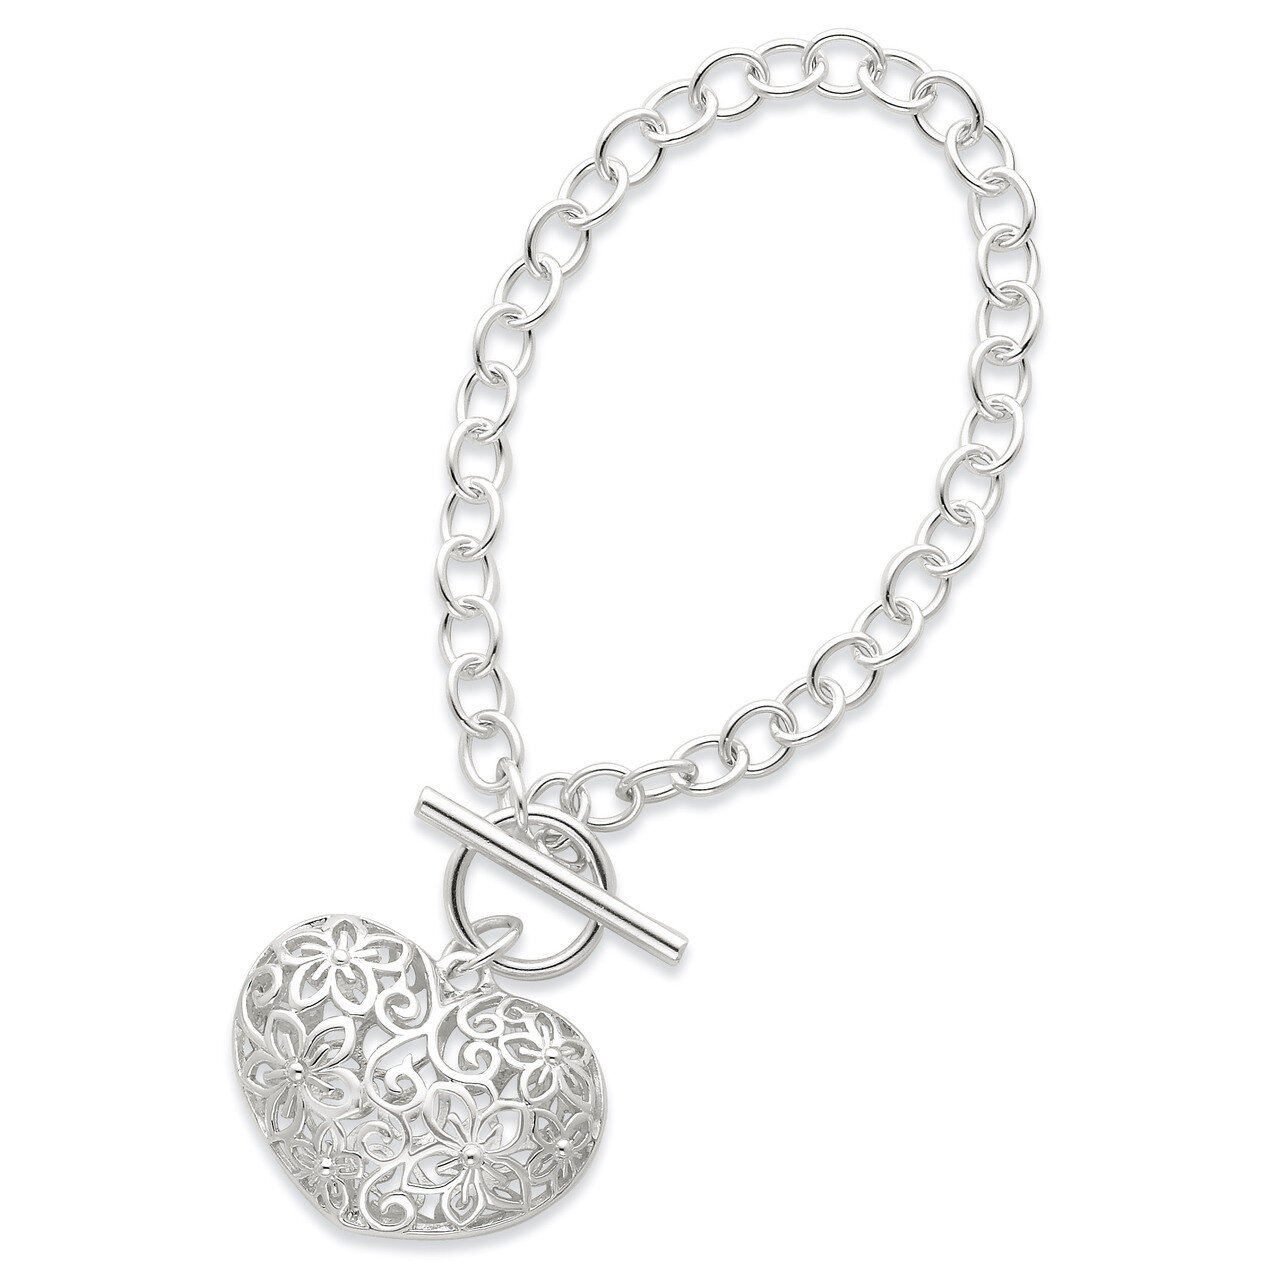 7.75 Inch Puffed Heart Toggle Bracelet Sterling Silver QG2978-7.75